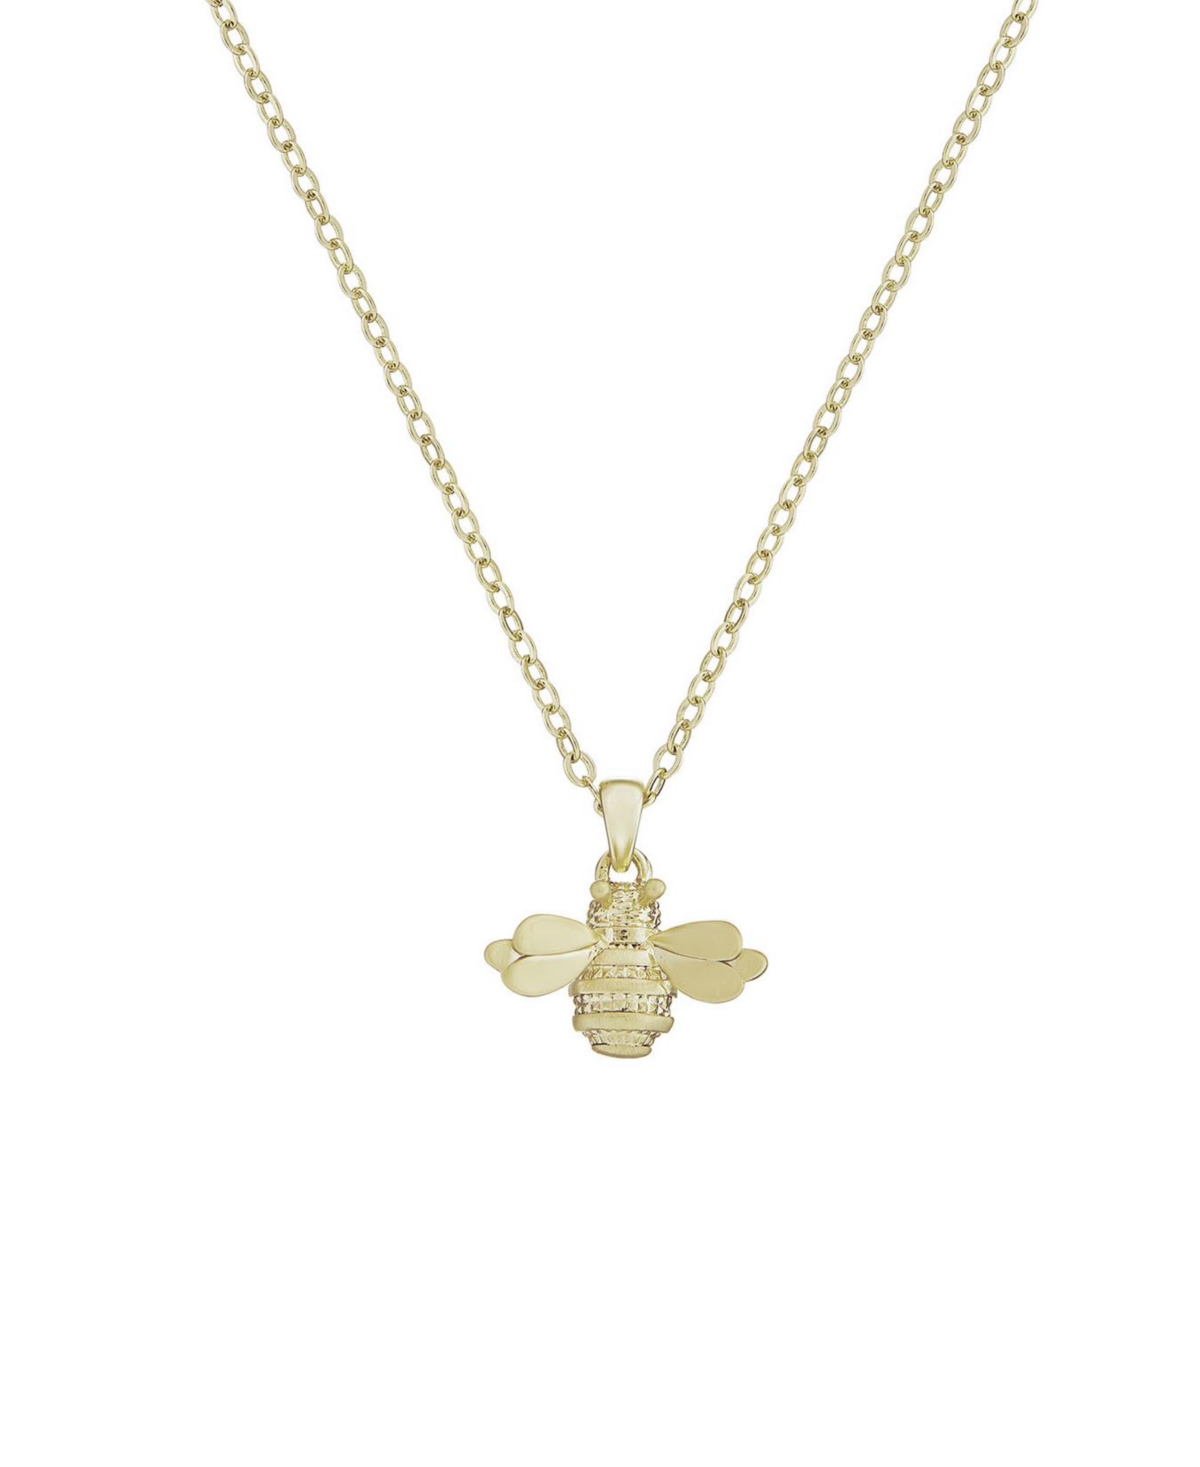 TED BAKER BELLEMA: BUMBLE BEE PENDANT NECKLACE FOR WOMEN